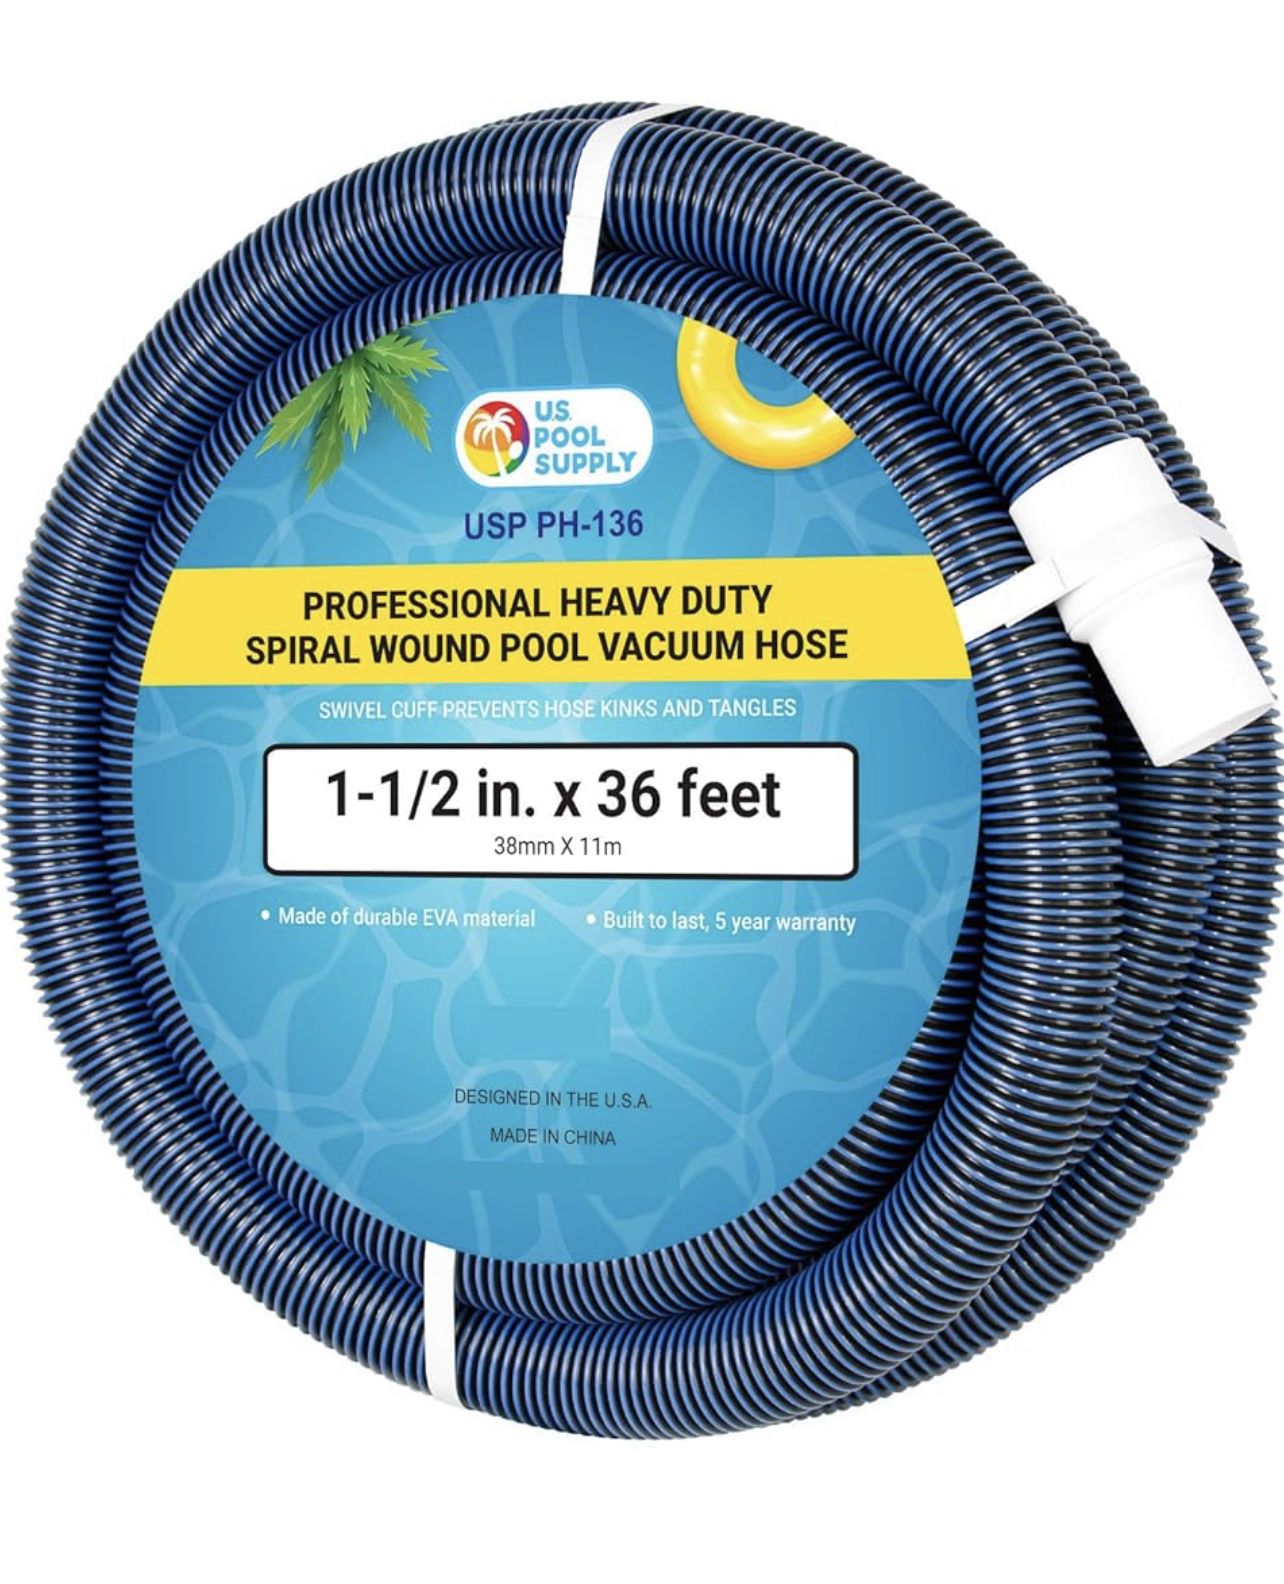 U.S. Pool Supply 1-1/2" x 36 Foot Professional Heavy Duty Spiral Wound Swimming Pool Vacuum Hose with Kink-Free Swivel Cuff, Flexible - Connect to Vac